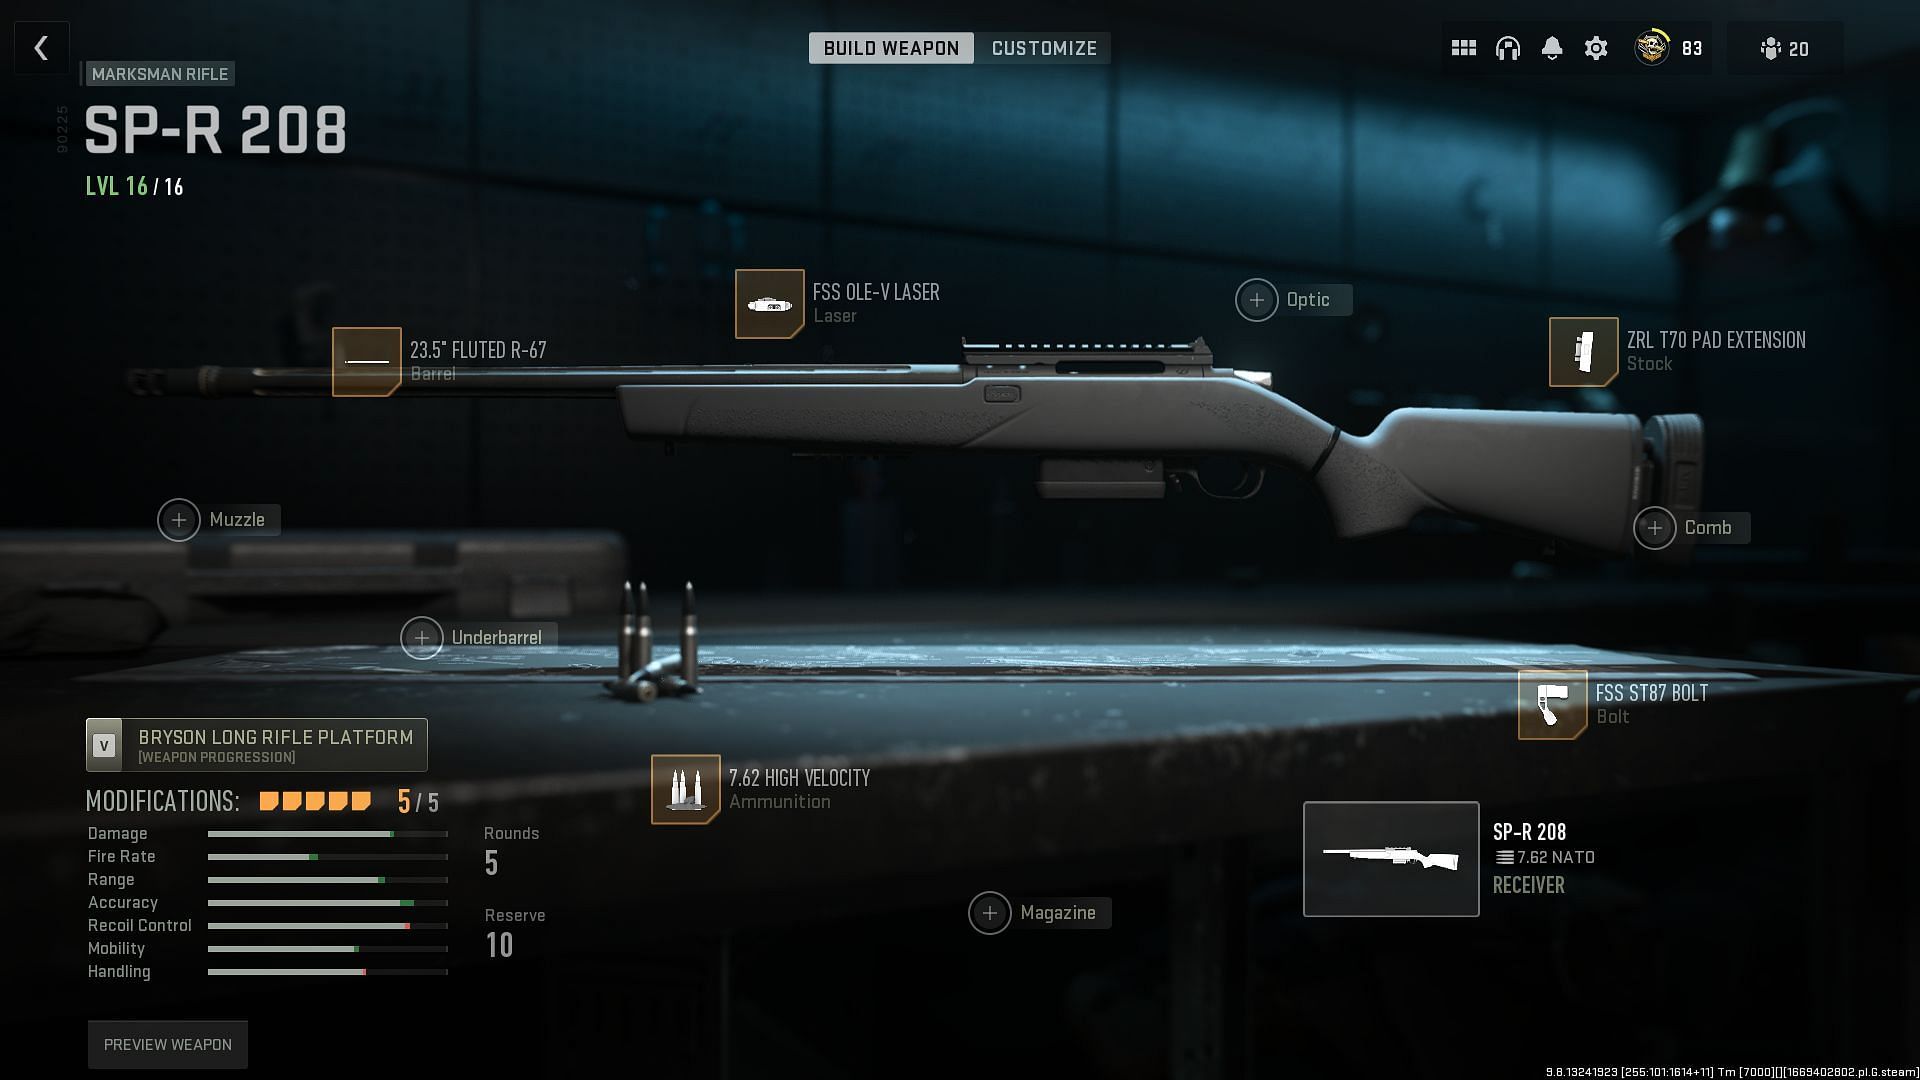 Best attachments for the SP-R 208 in Modern Warfare 2 (Image via Activision)